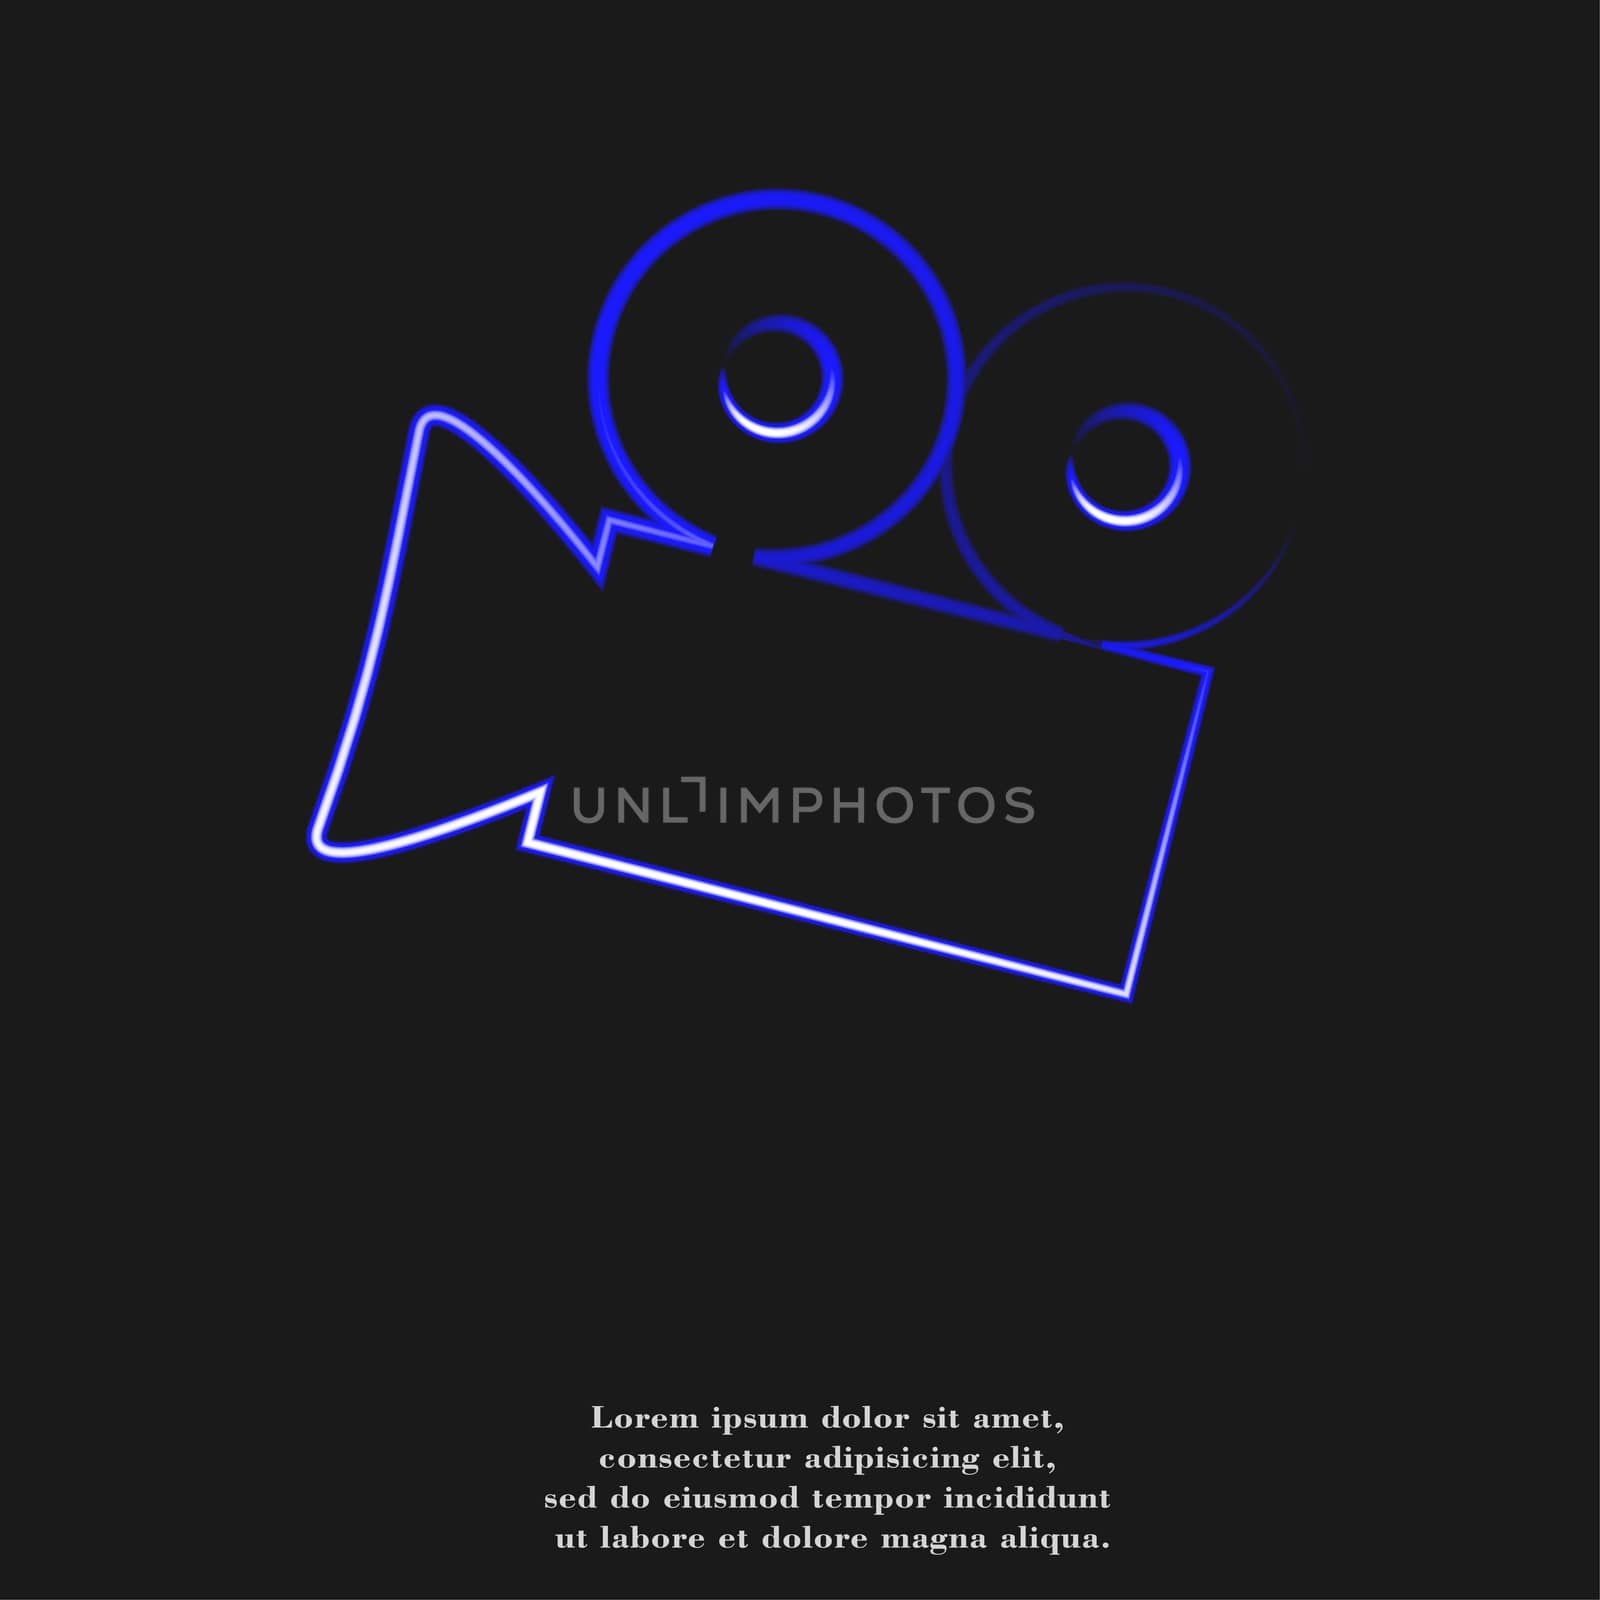 Cinema camera icon flat design with abstract background by serhii_lohvyniuk